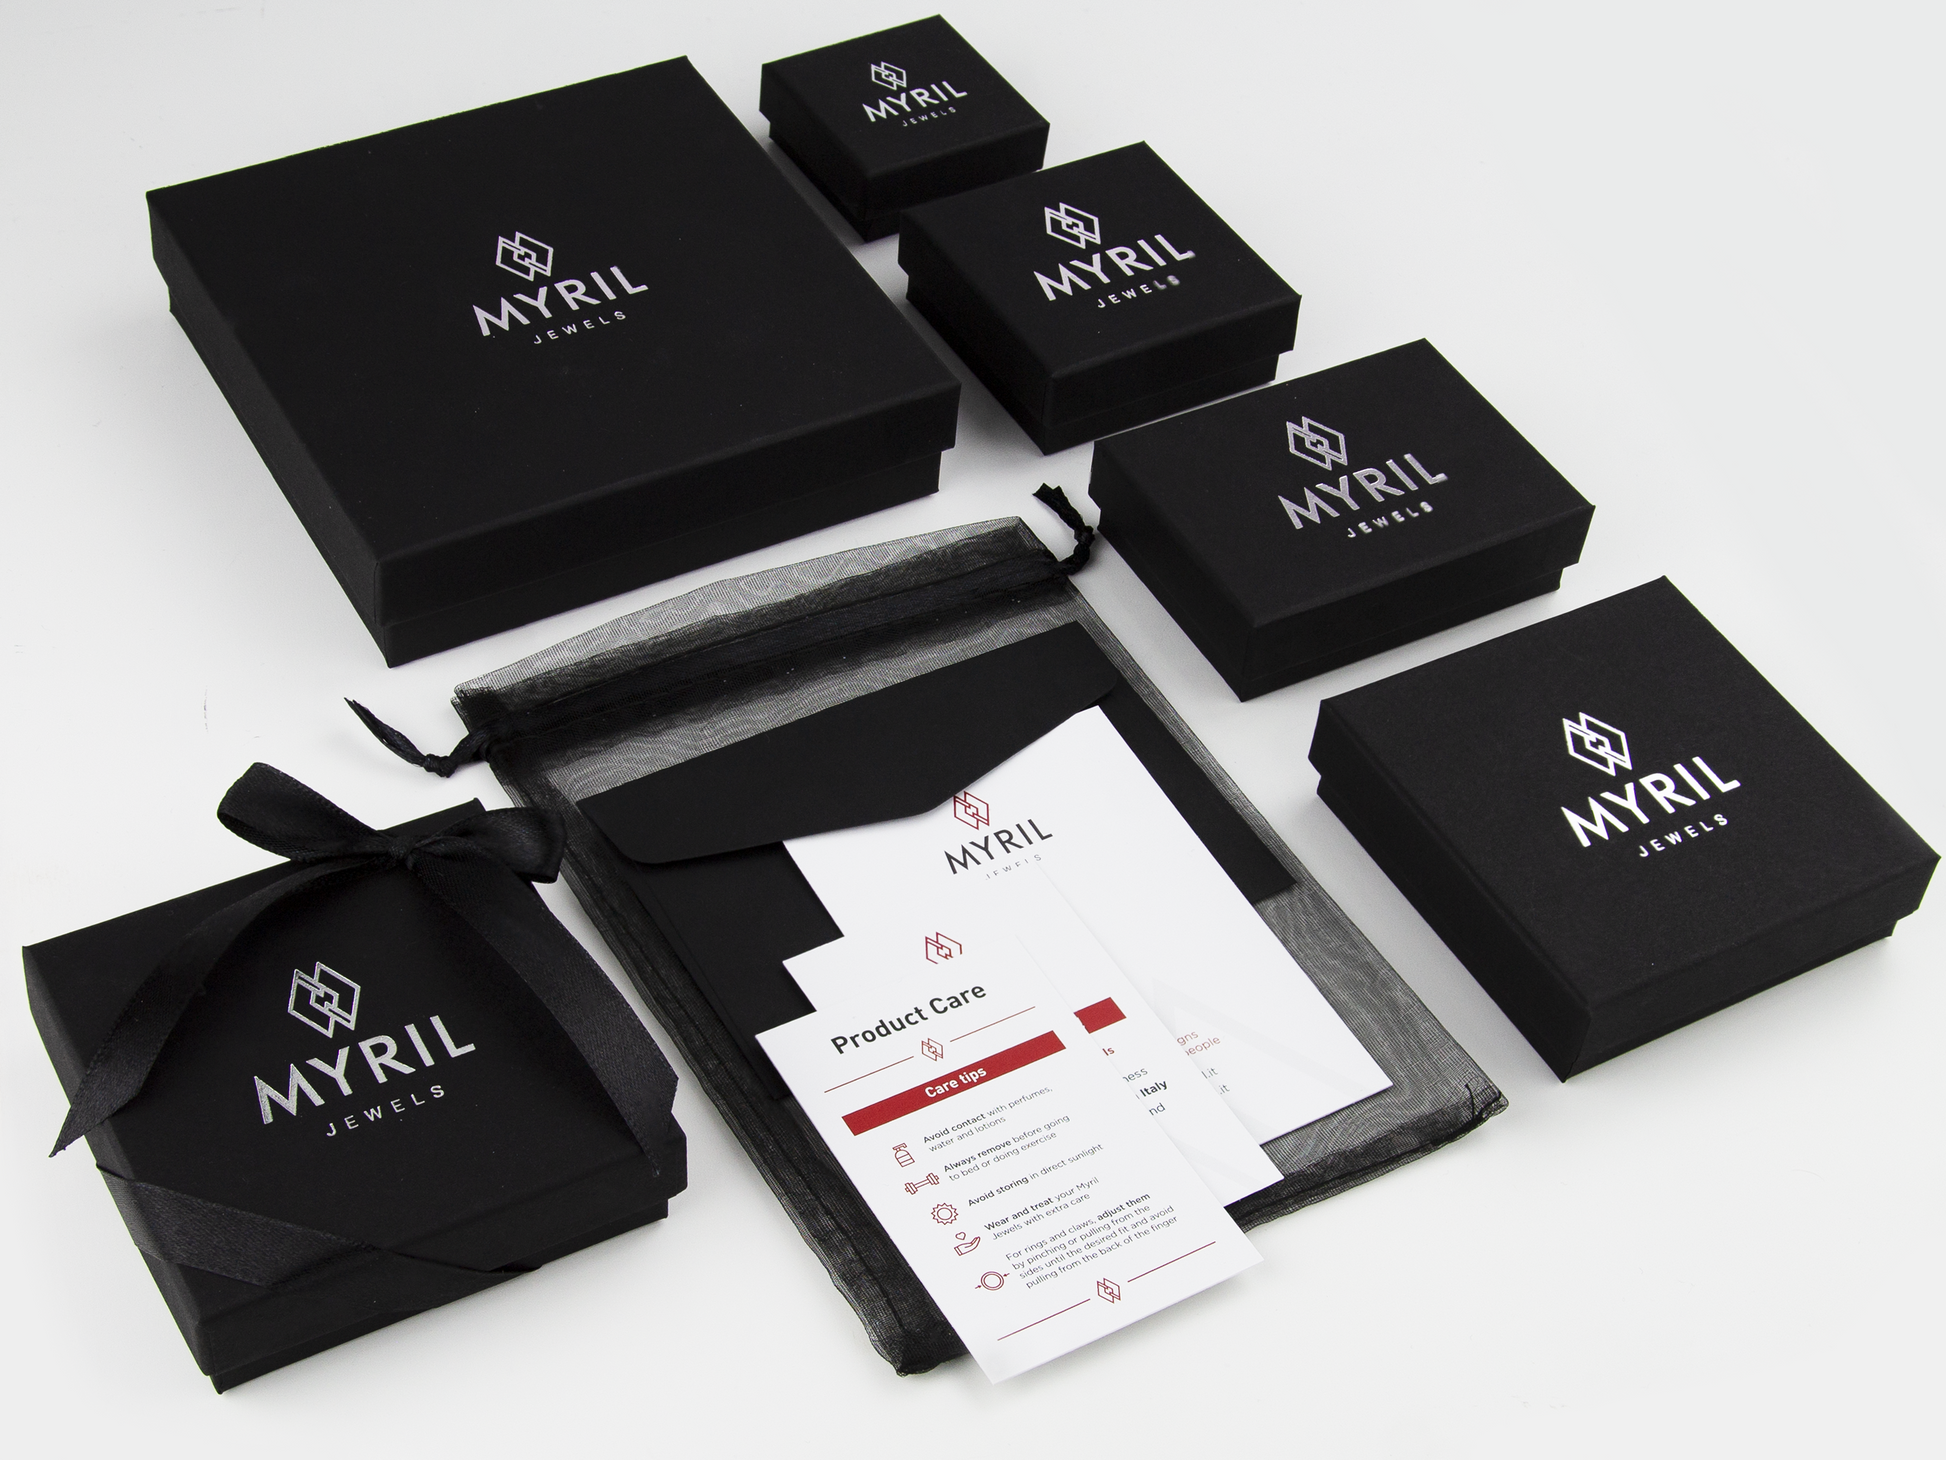 A diverse collection of Myril Jewels' packaging arrayed neatly, showcasing the brand's attention to detail and commitment to a darkly elegant presentation. The assortment includes sleek black boxes with the Myril logo, soft pouches, and a product care card, alluding to a luxurious unboxing experience for those who cherish neo-gothic, avant-garde jewelry. This ensemble is ideal for gifts that cater to lovers of gothic-chic, whimsigoth, and punk styles, adding a special touch to the gifting experience.